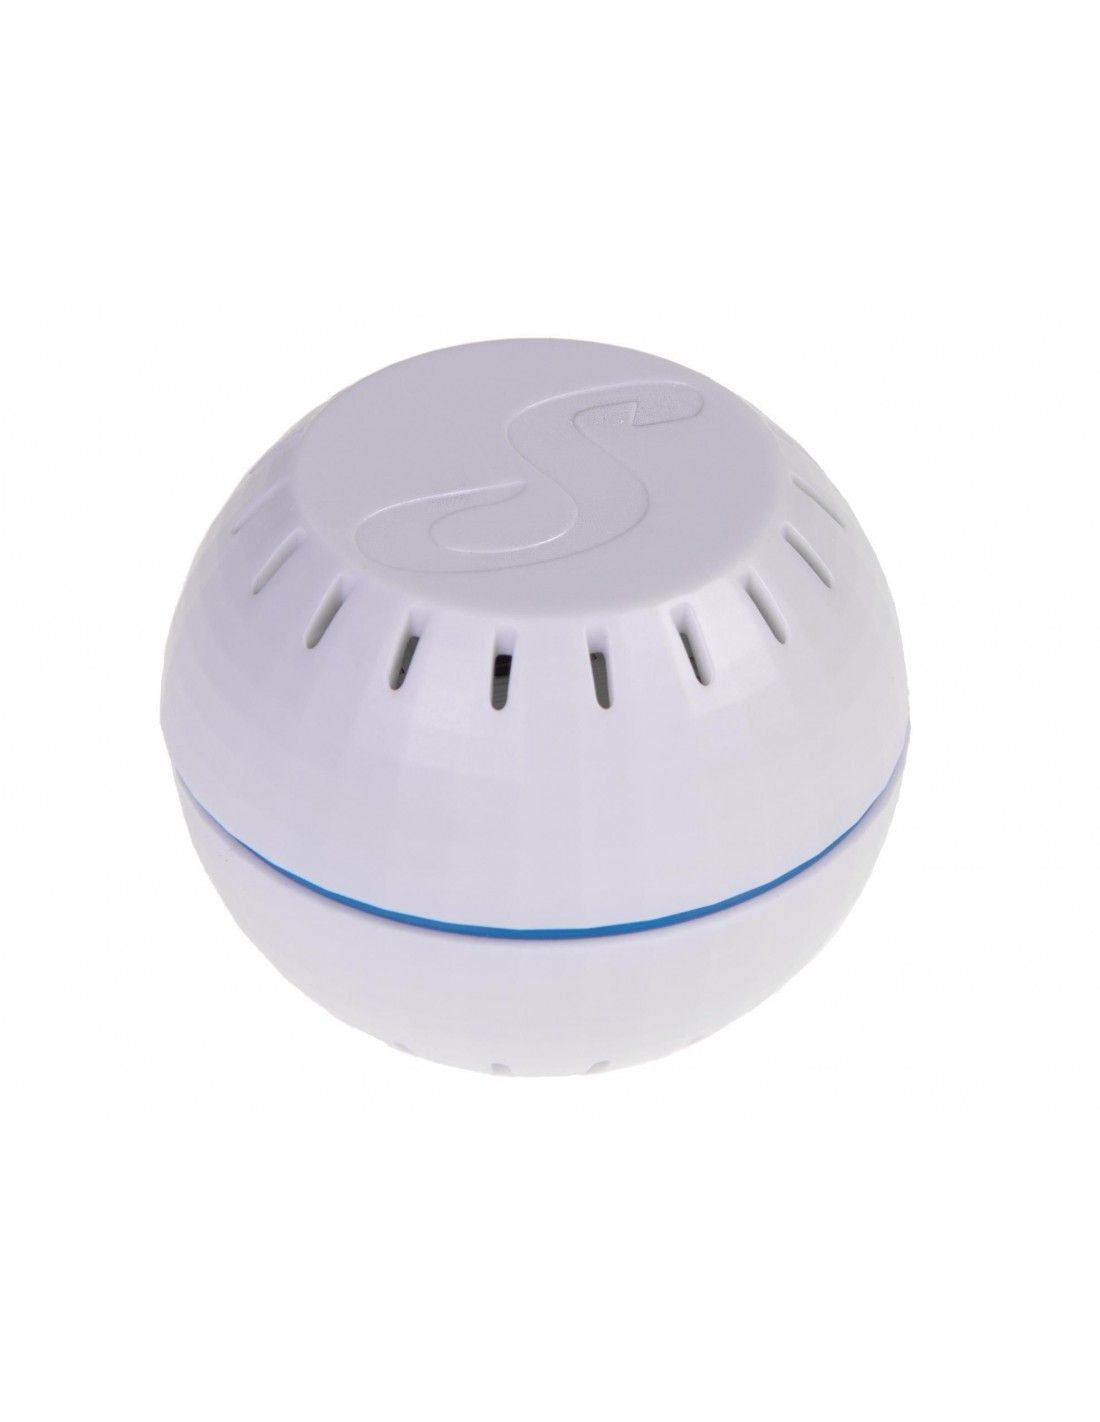 Shelly HT WiFi Operated Humidity And Temperature Sensor Has Built in  Modules For Humidity And Temperature Low Consumption